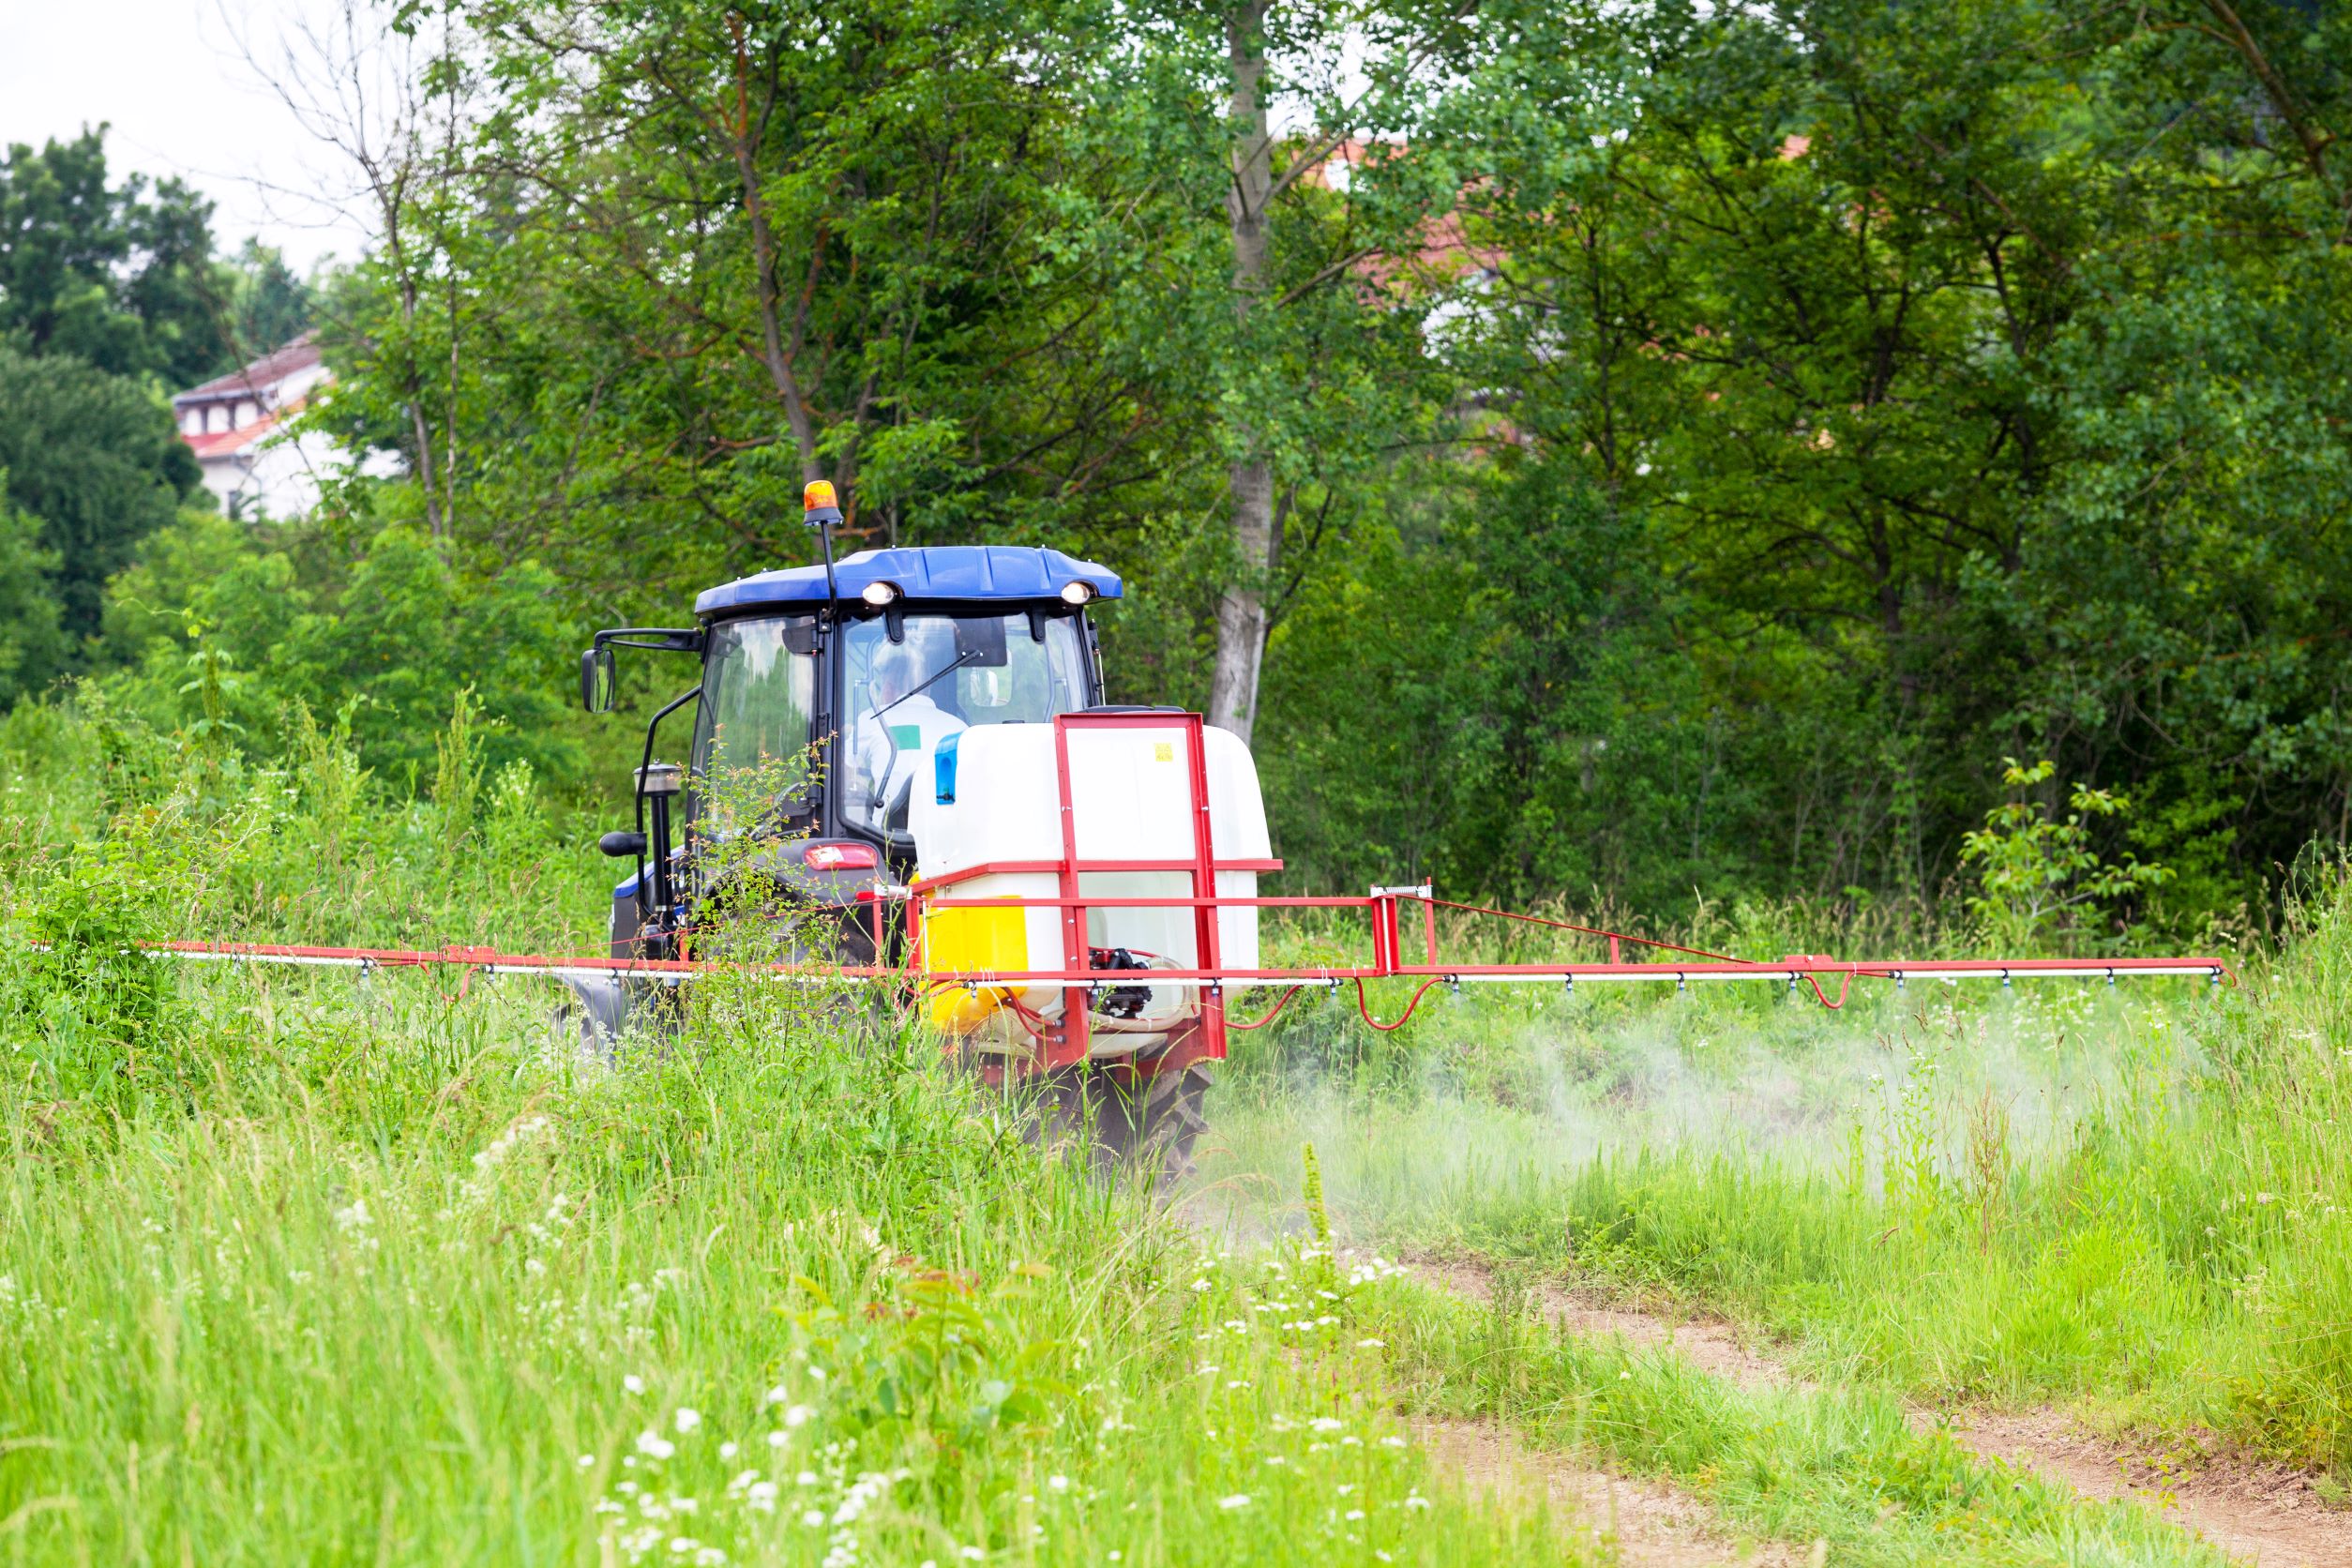 Tractor covering a wide area with mosquito repellent.